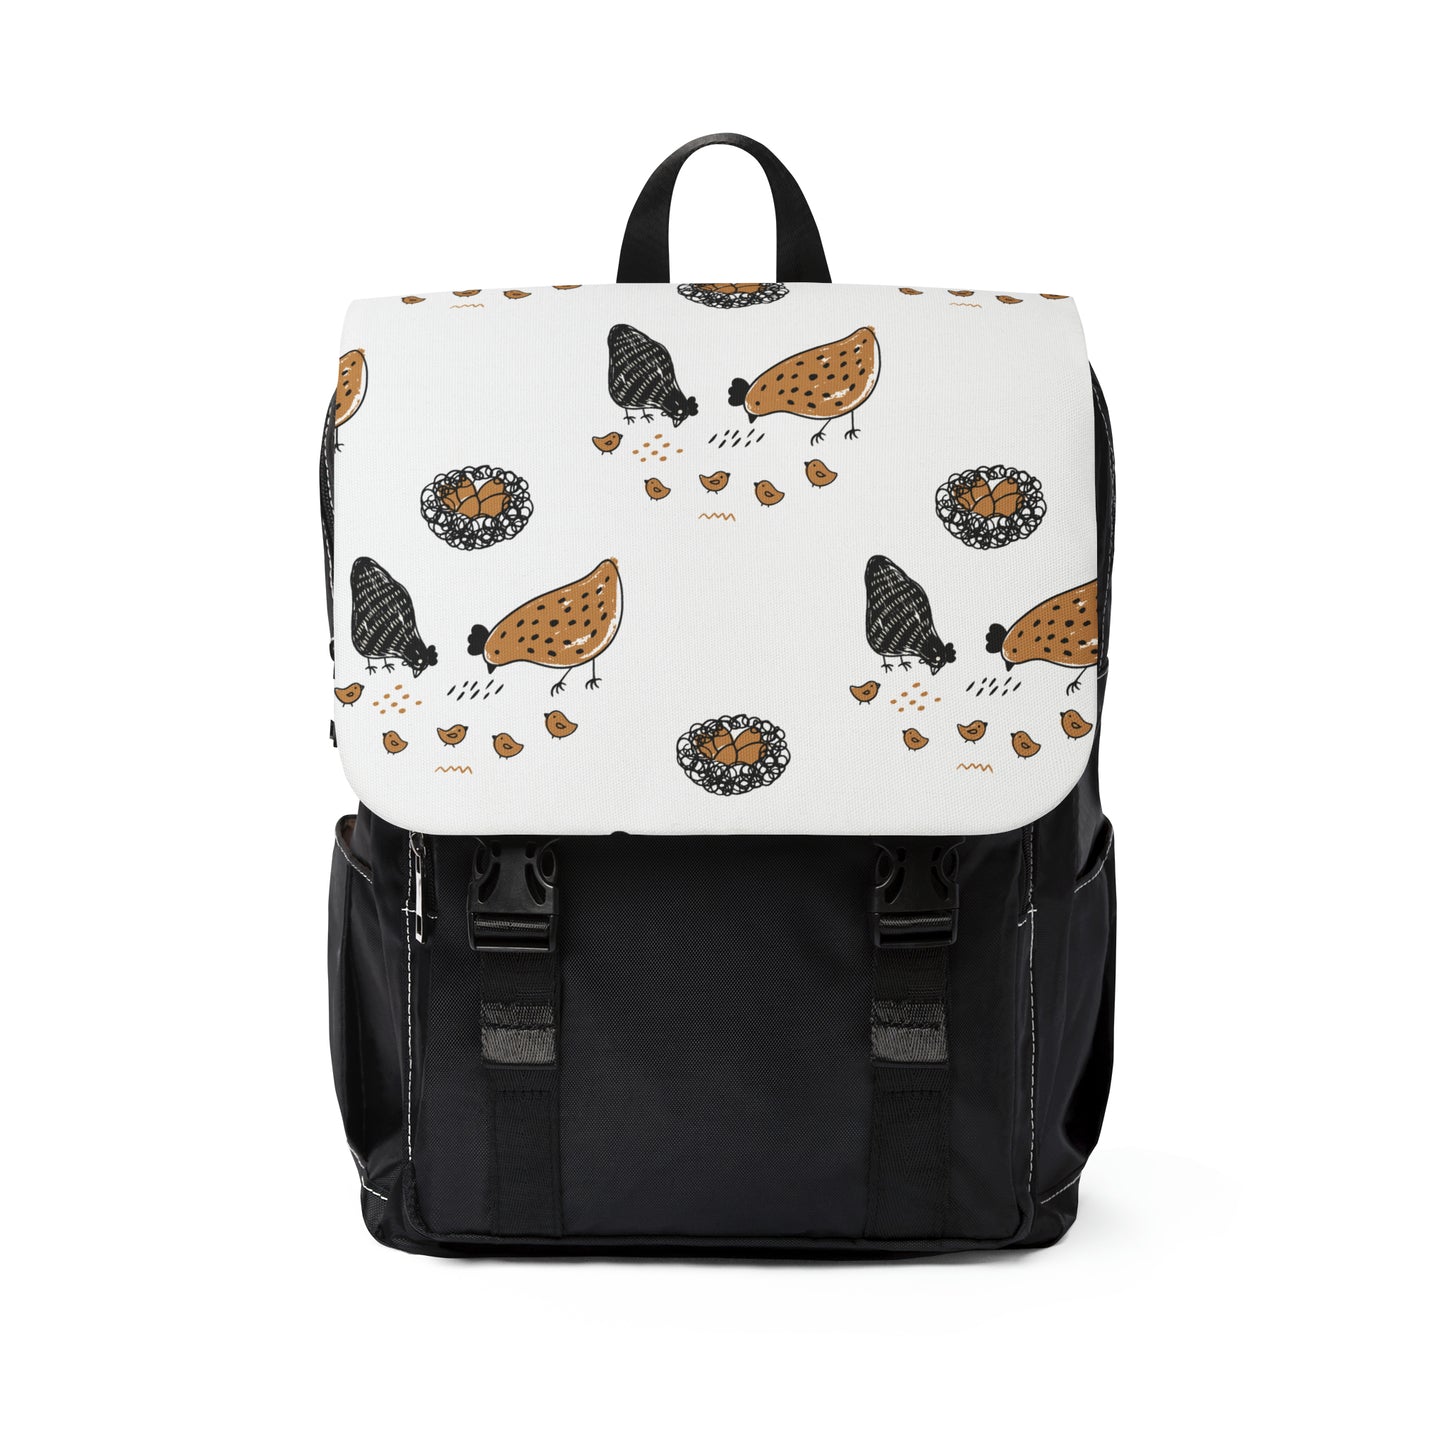 Chickens Unisex Casual Shoulder Backpack